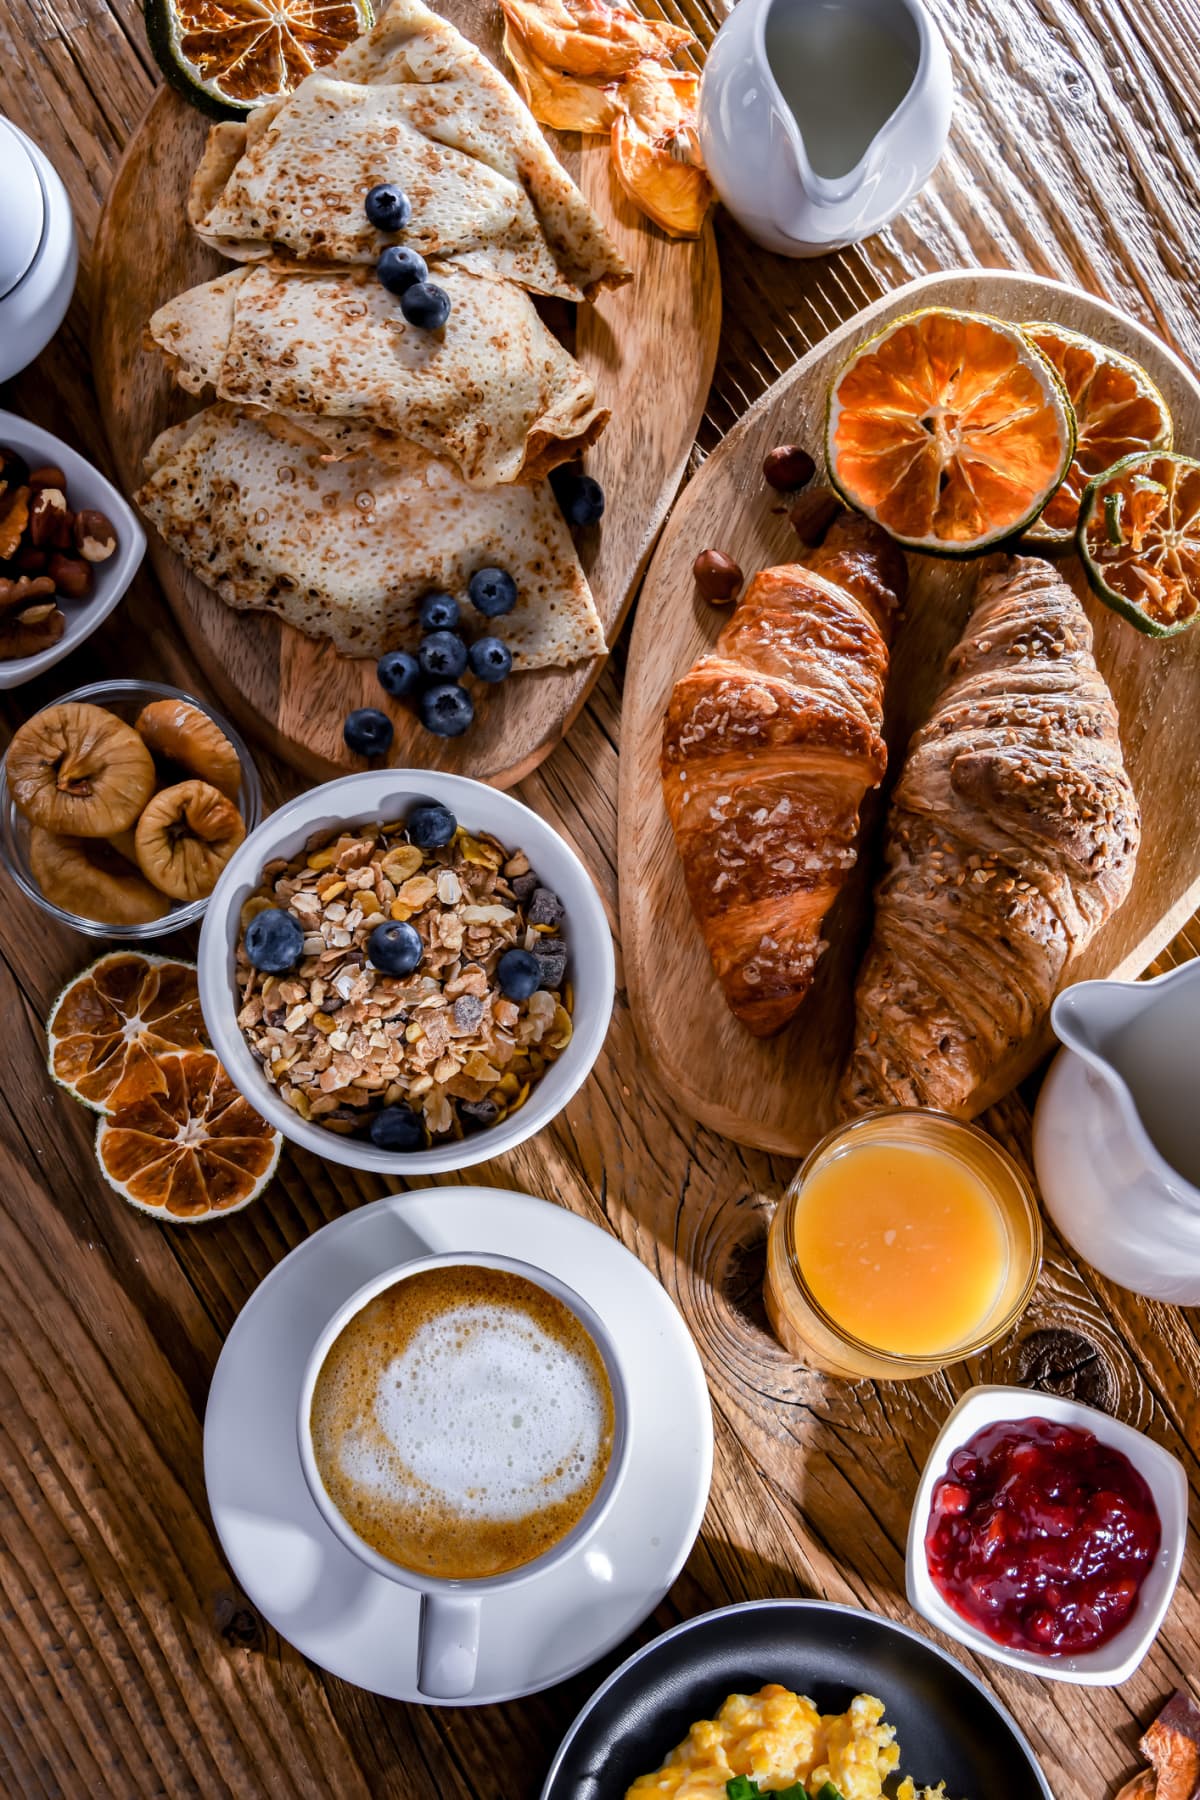 Spread of breakfast foods including oats, croissants, berries, and crepes